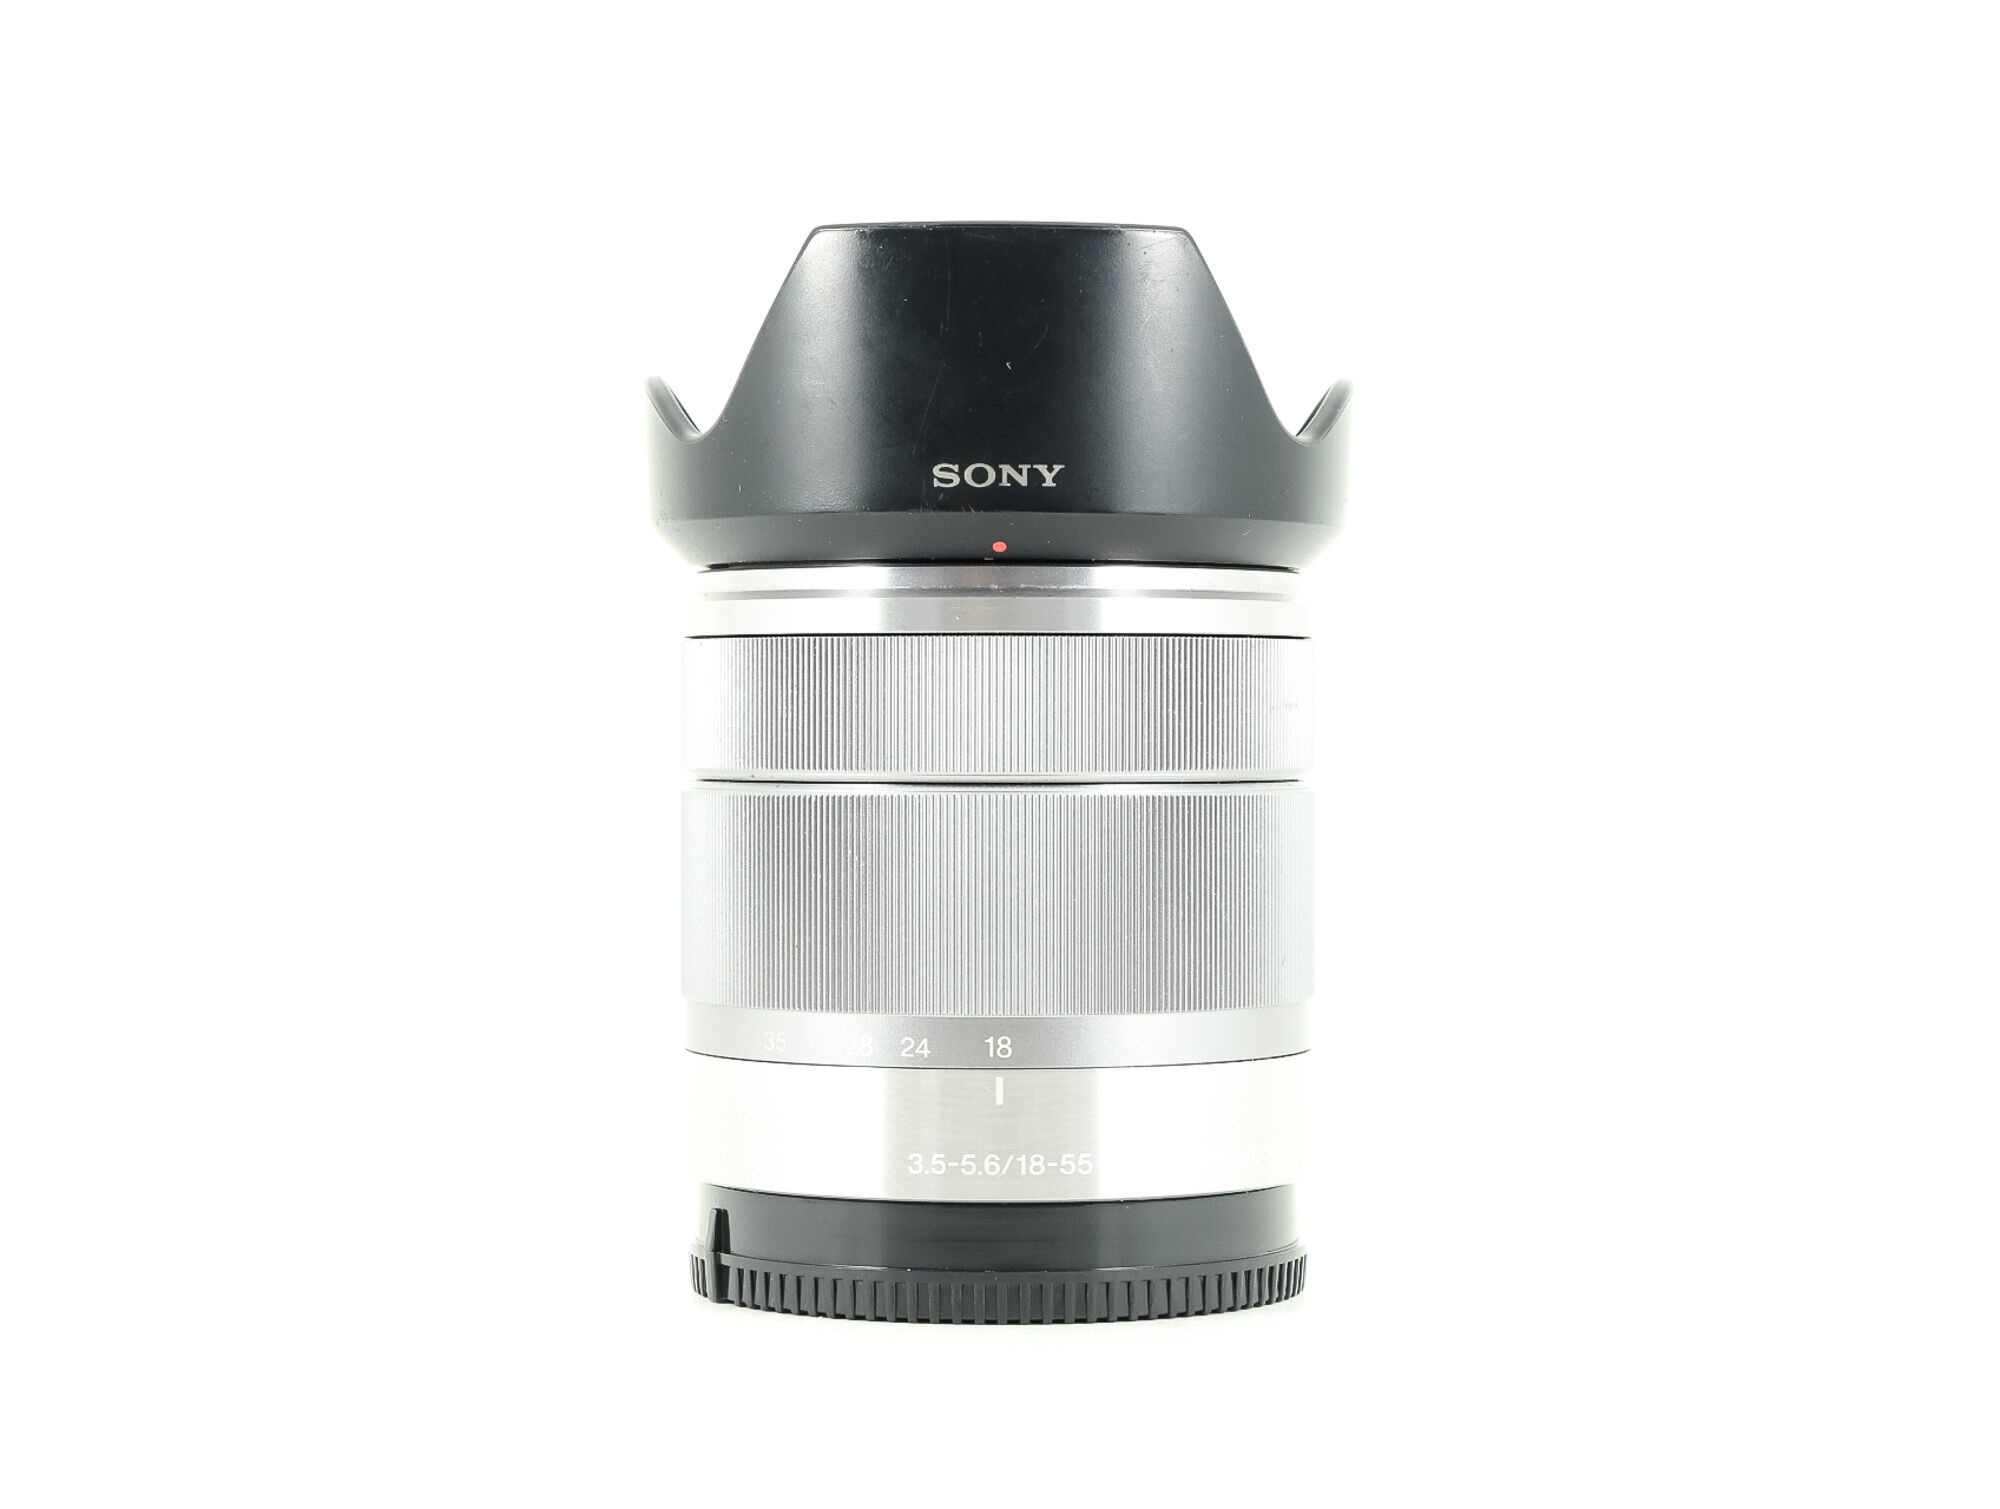 Sony E 18-55mm f/3.5-5.6 OSS (Condition: Good)